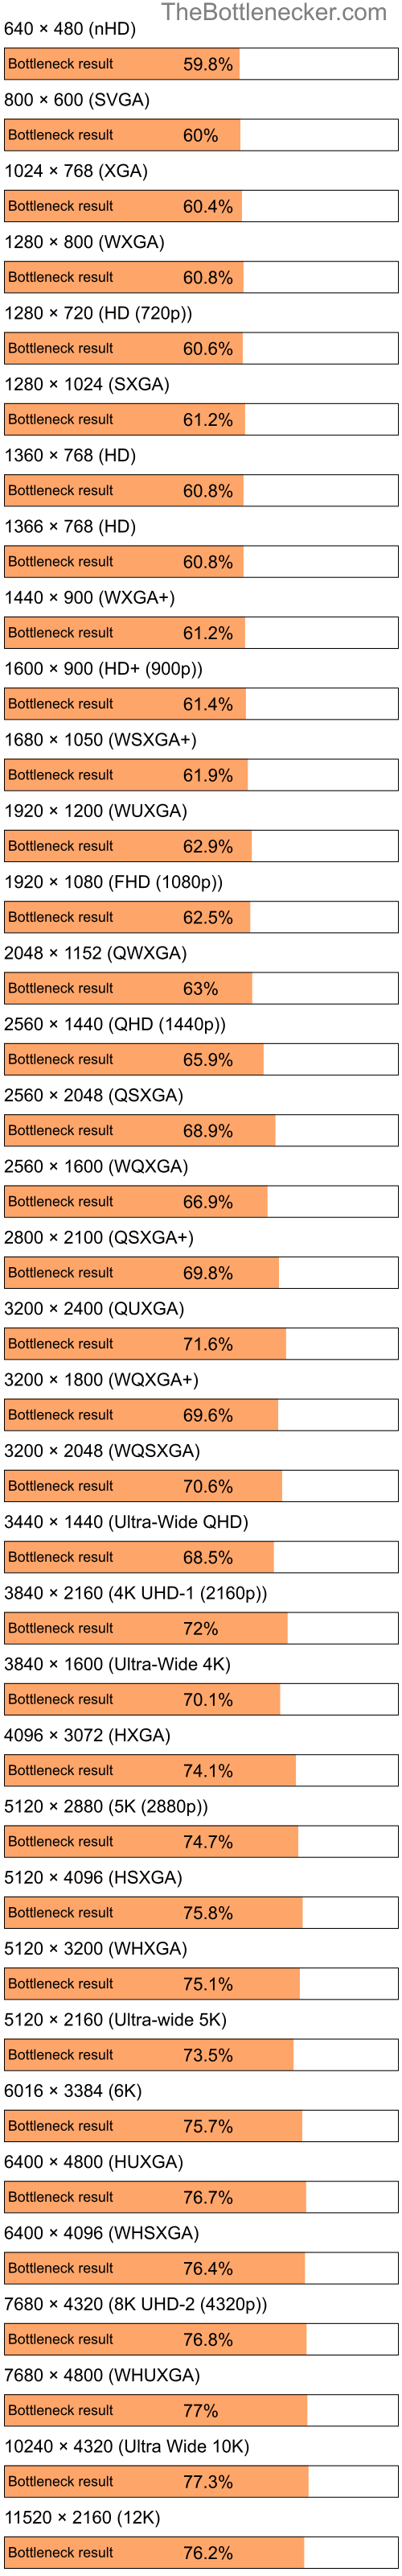 Bottleneck results by resolution for Intel Atom Z520 and AMD Mobility Radeon X1700 in General Tasks